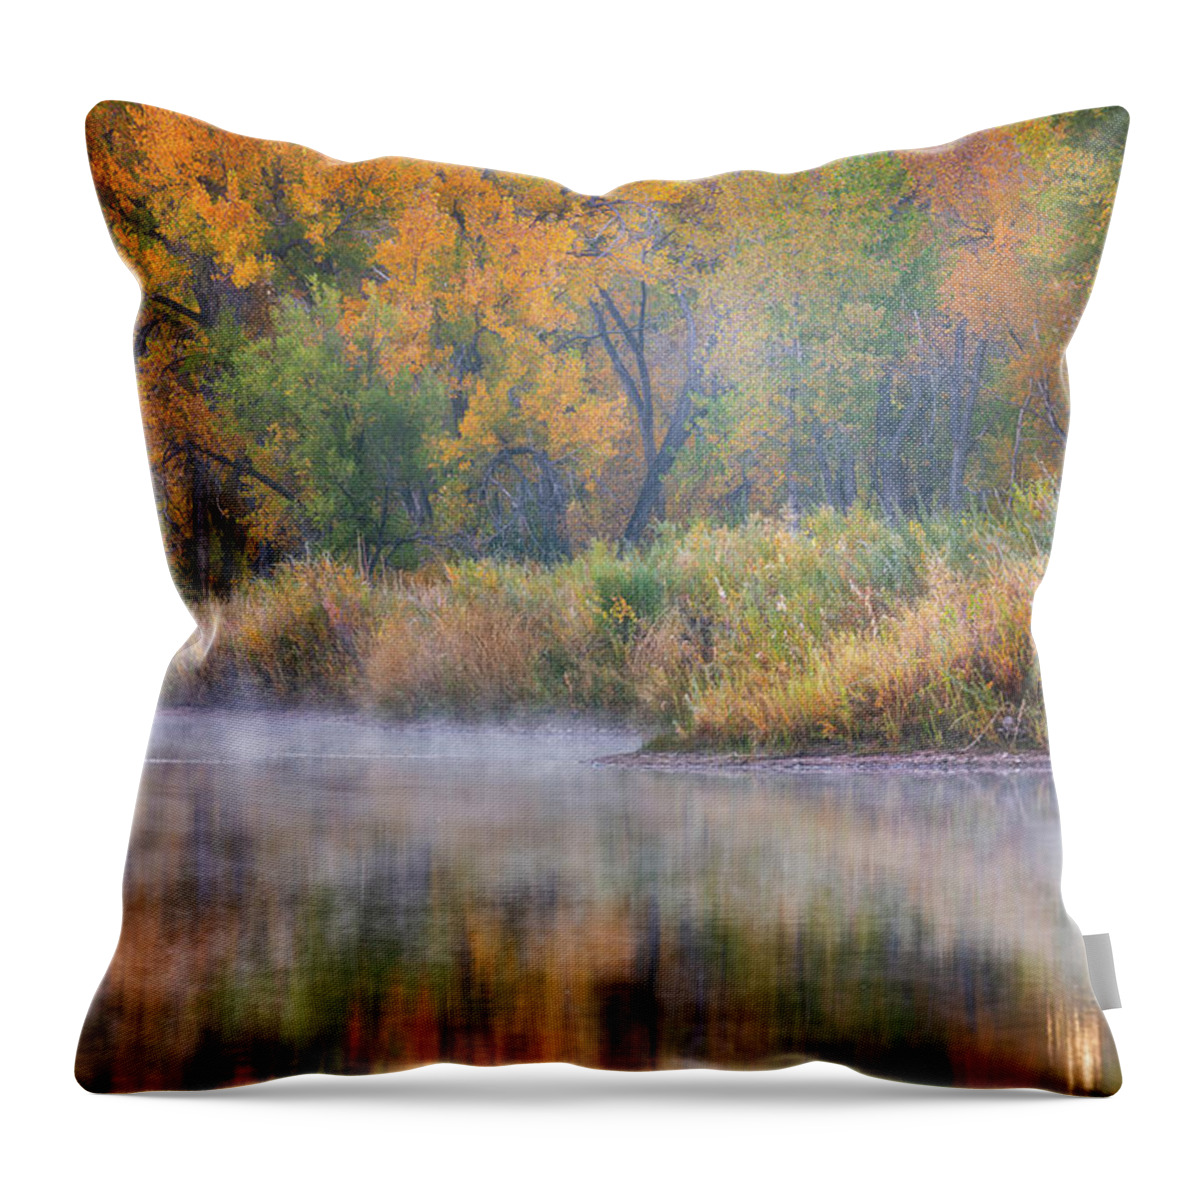 Pond Throw Pillow featuring the photograph Autumn's Canvas by Darren White